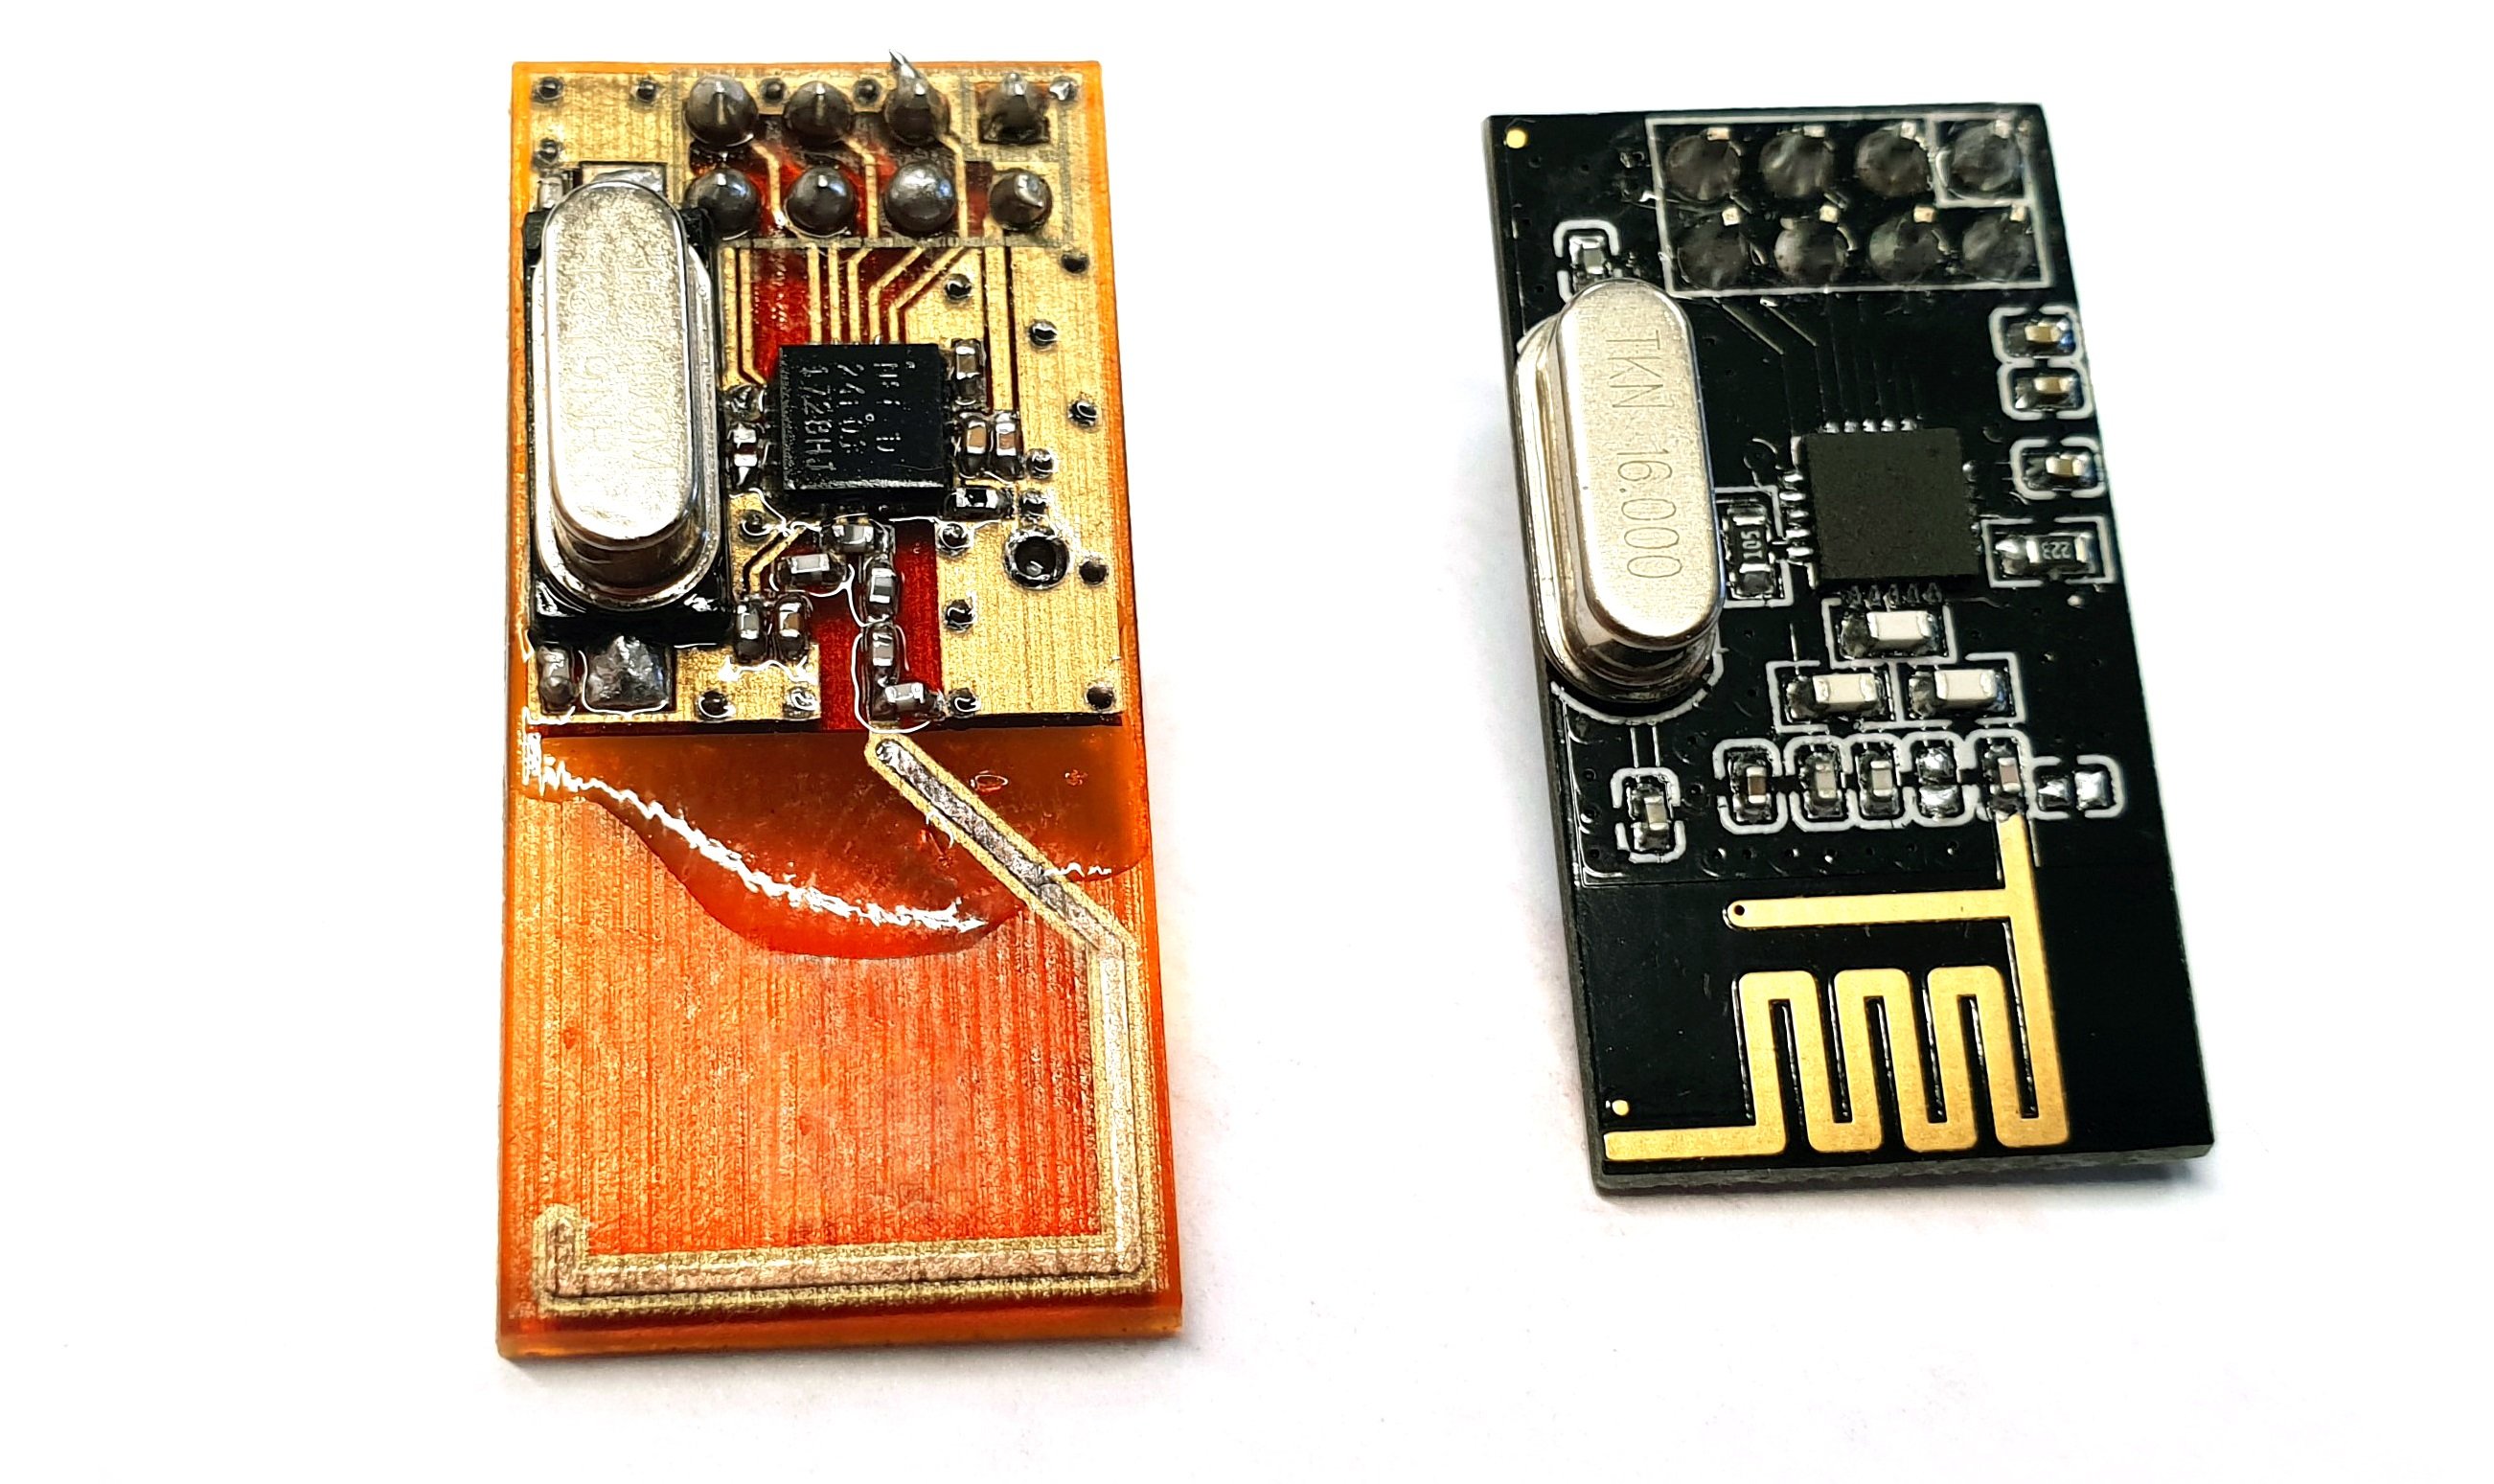 Microstrip patch antenna prototype and transceiver